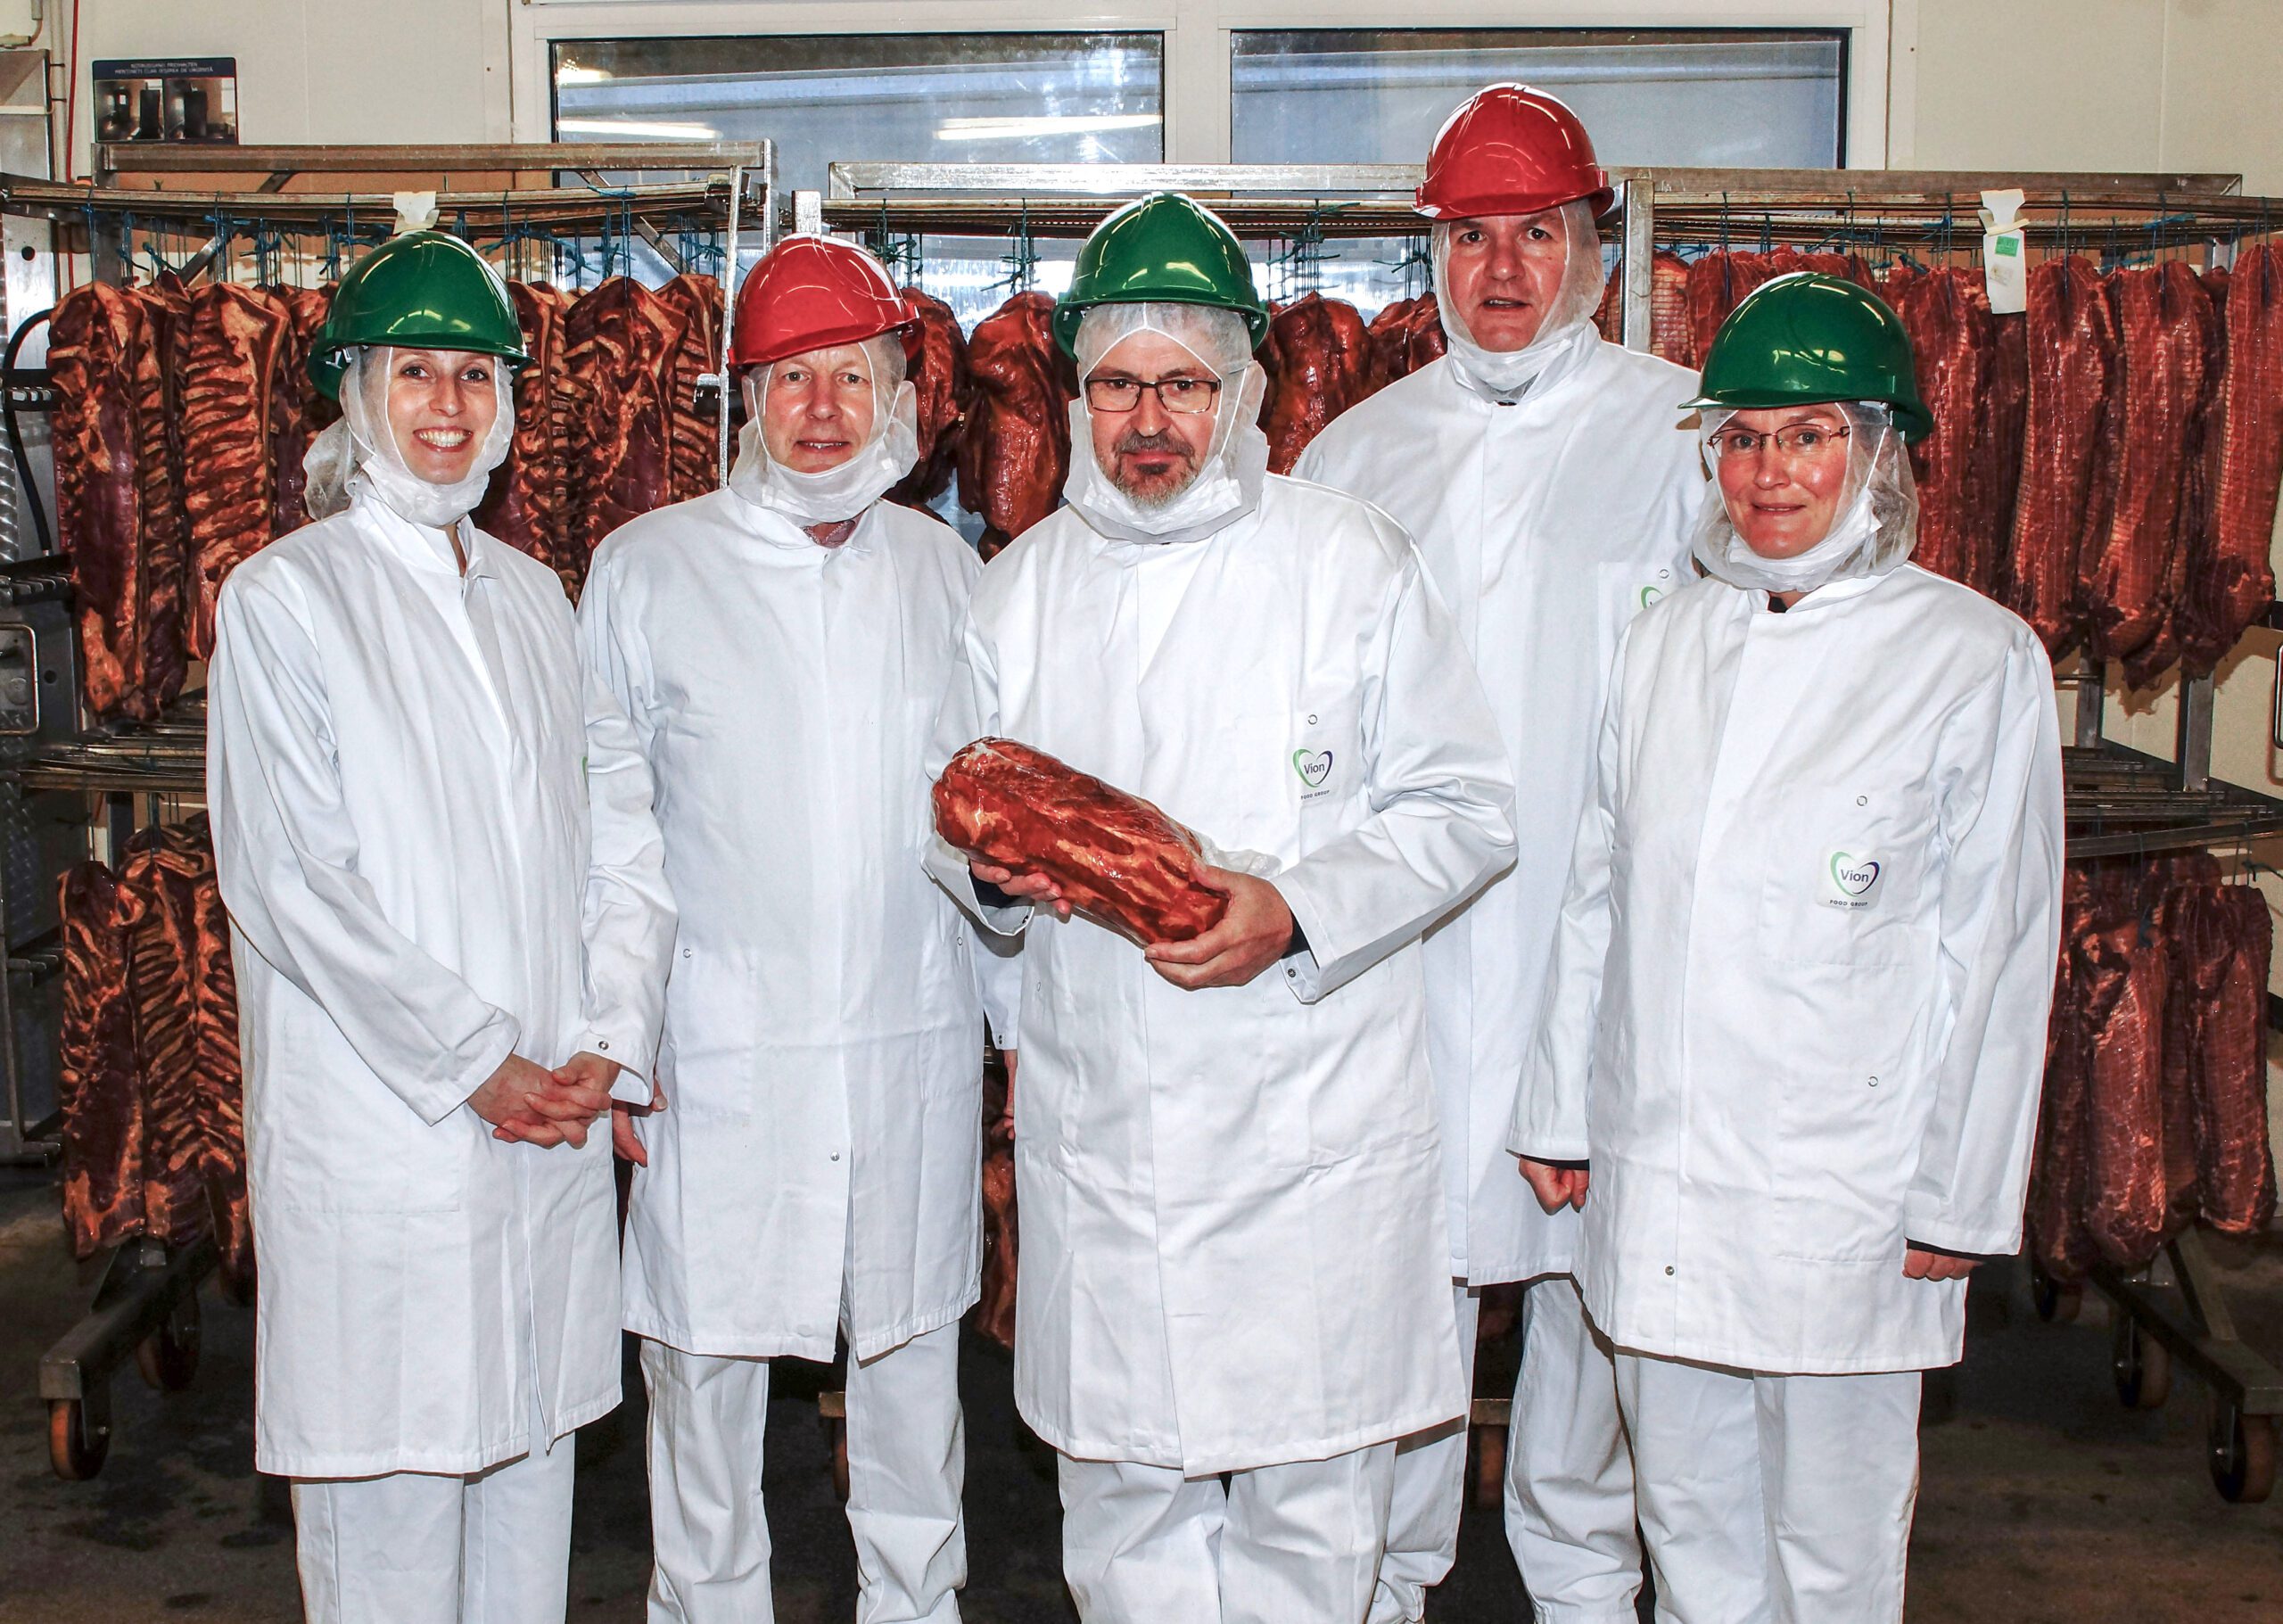 Brandenburg’s Minister of Agriculture Axel Vogel visits Vion-Perleberg – state government supports regional meat supply approach